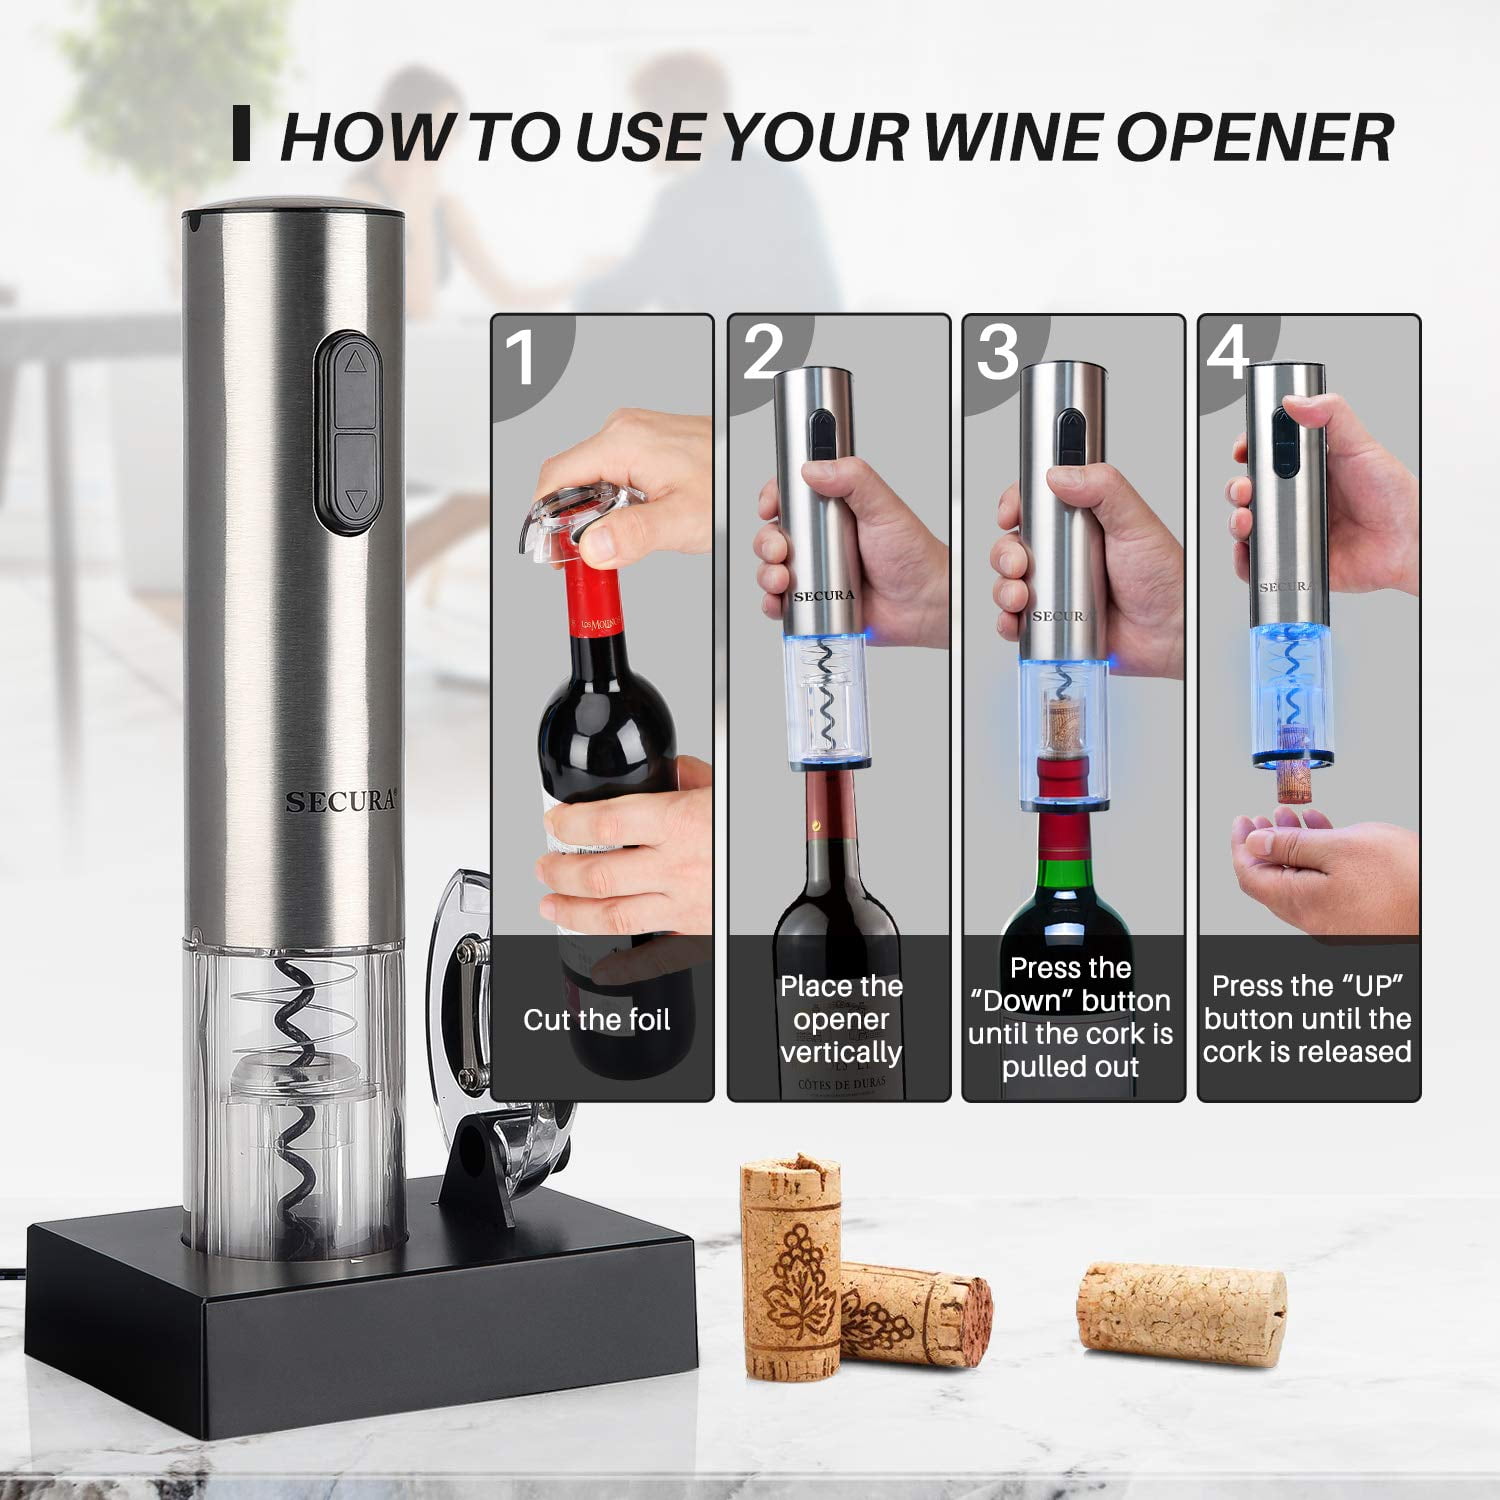 OLEVC Rechargeable Electric Wine Bottle Opener Mini Portable & Reusable Wine Bottle Opener for Household Bar Kitchen Party Black Automatic One-Button Corkscrew Opener with Foil Cutter Outdoor 